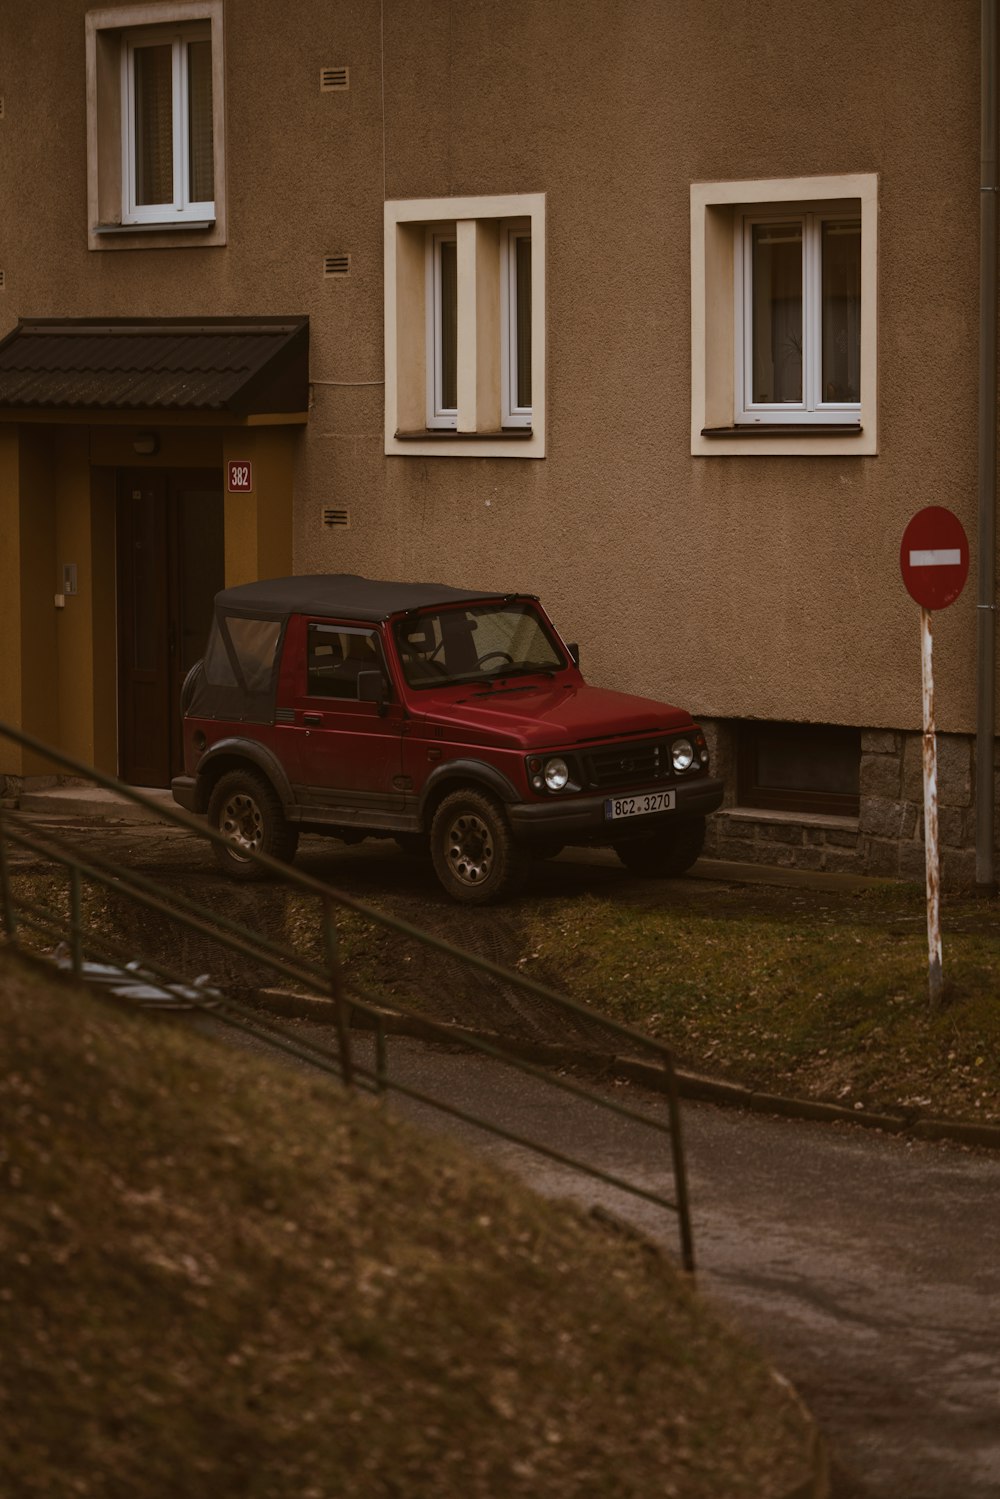 a red car parked in front of a house